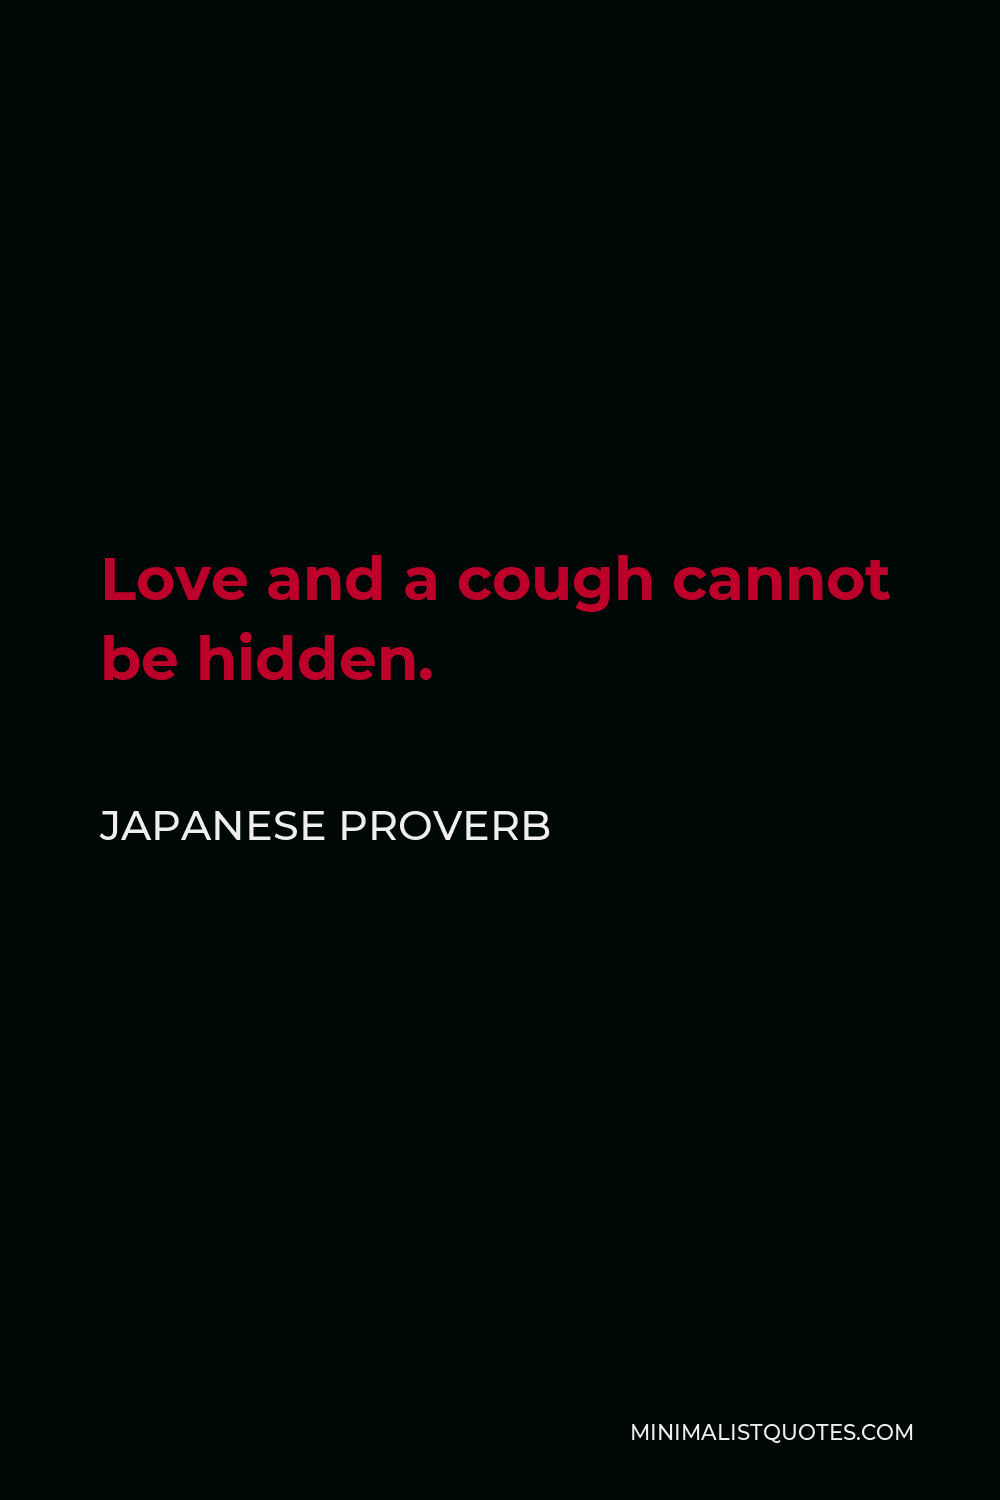 Japanese Proverb Quote - Love and a cough cannot be hidden.